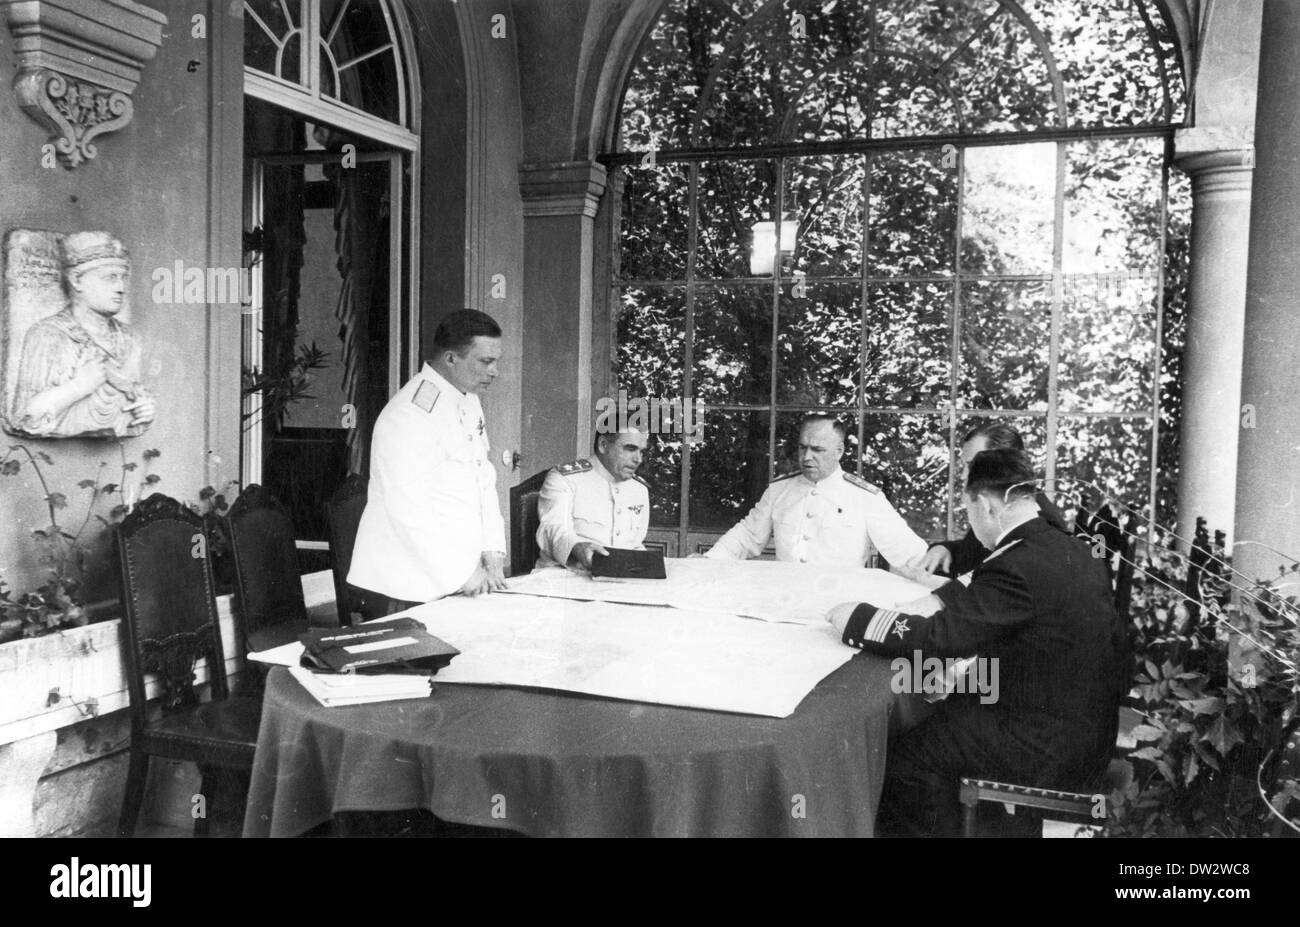 Marshal G.K. Zhukov, Chief of Staff of the Red Army of the USSR (C), and other Soviet officers of the General Staff gather around a table with maps at the Potsdam Conference at Cecilienhof Palace in Potsdam, summer of 1945. The victorious powers in World War II decided on the post-war development with the Potsdam Agreement. Photo: Yevgeny Chaldej - NO WIRE SERVICE Stock Photo